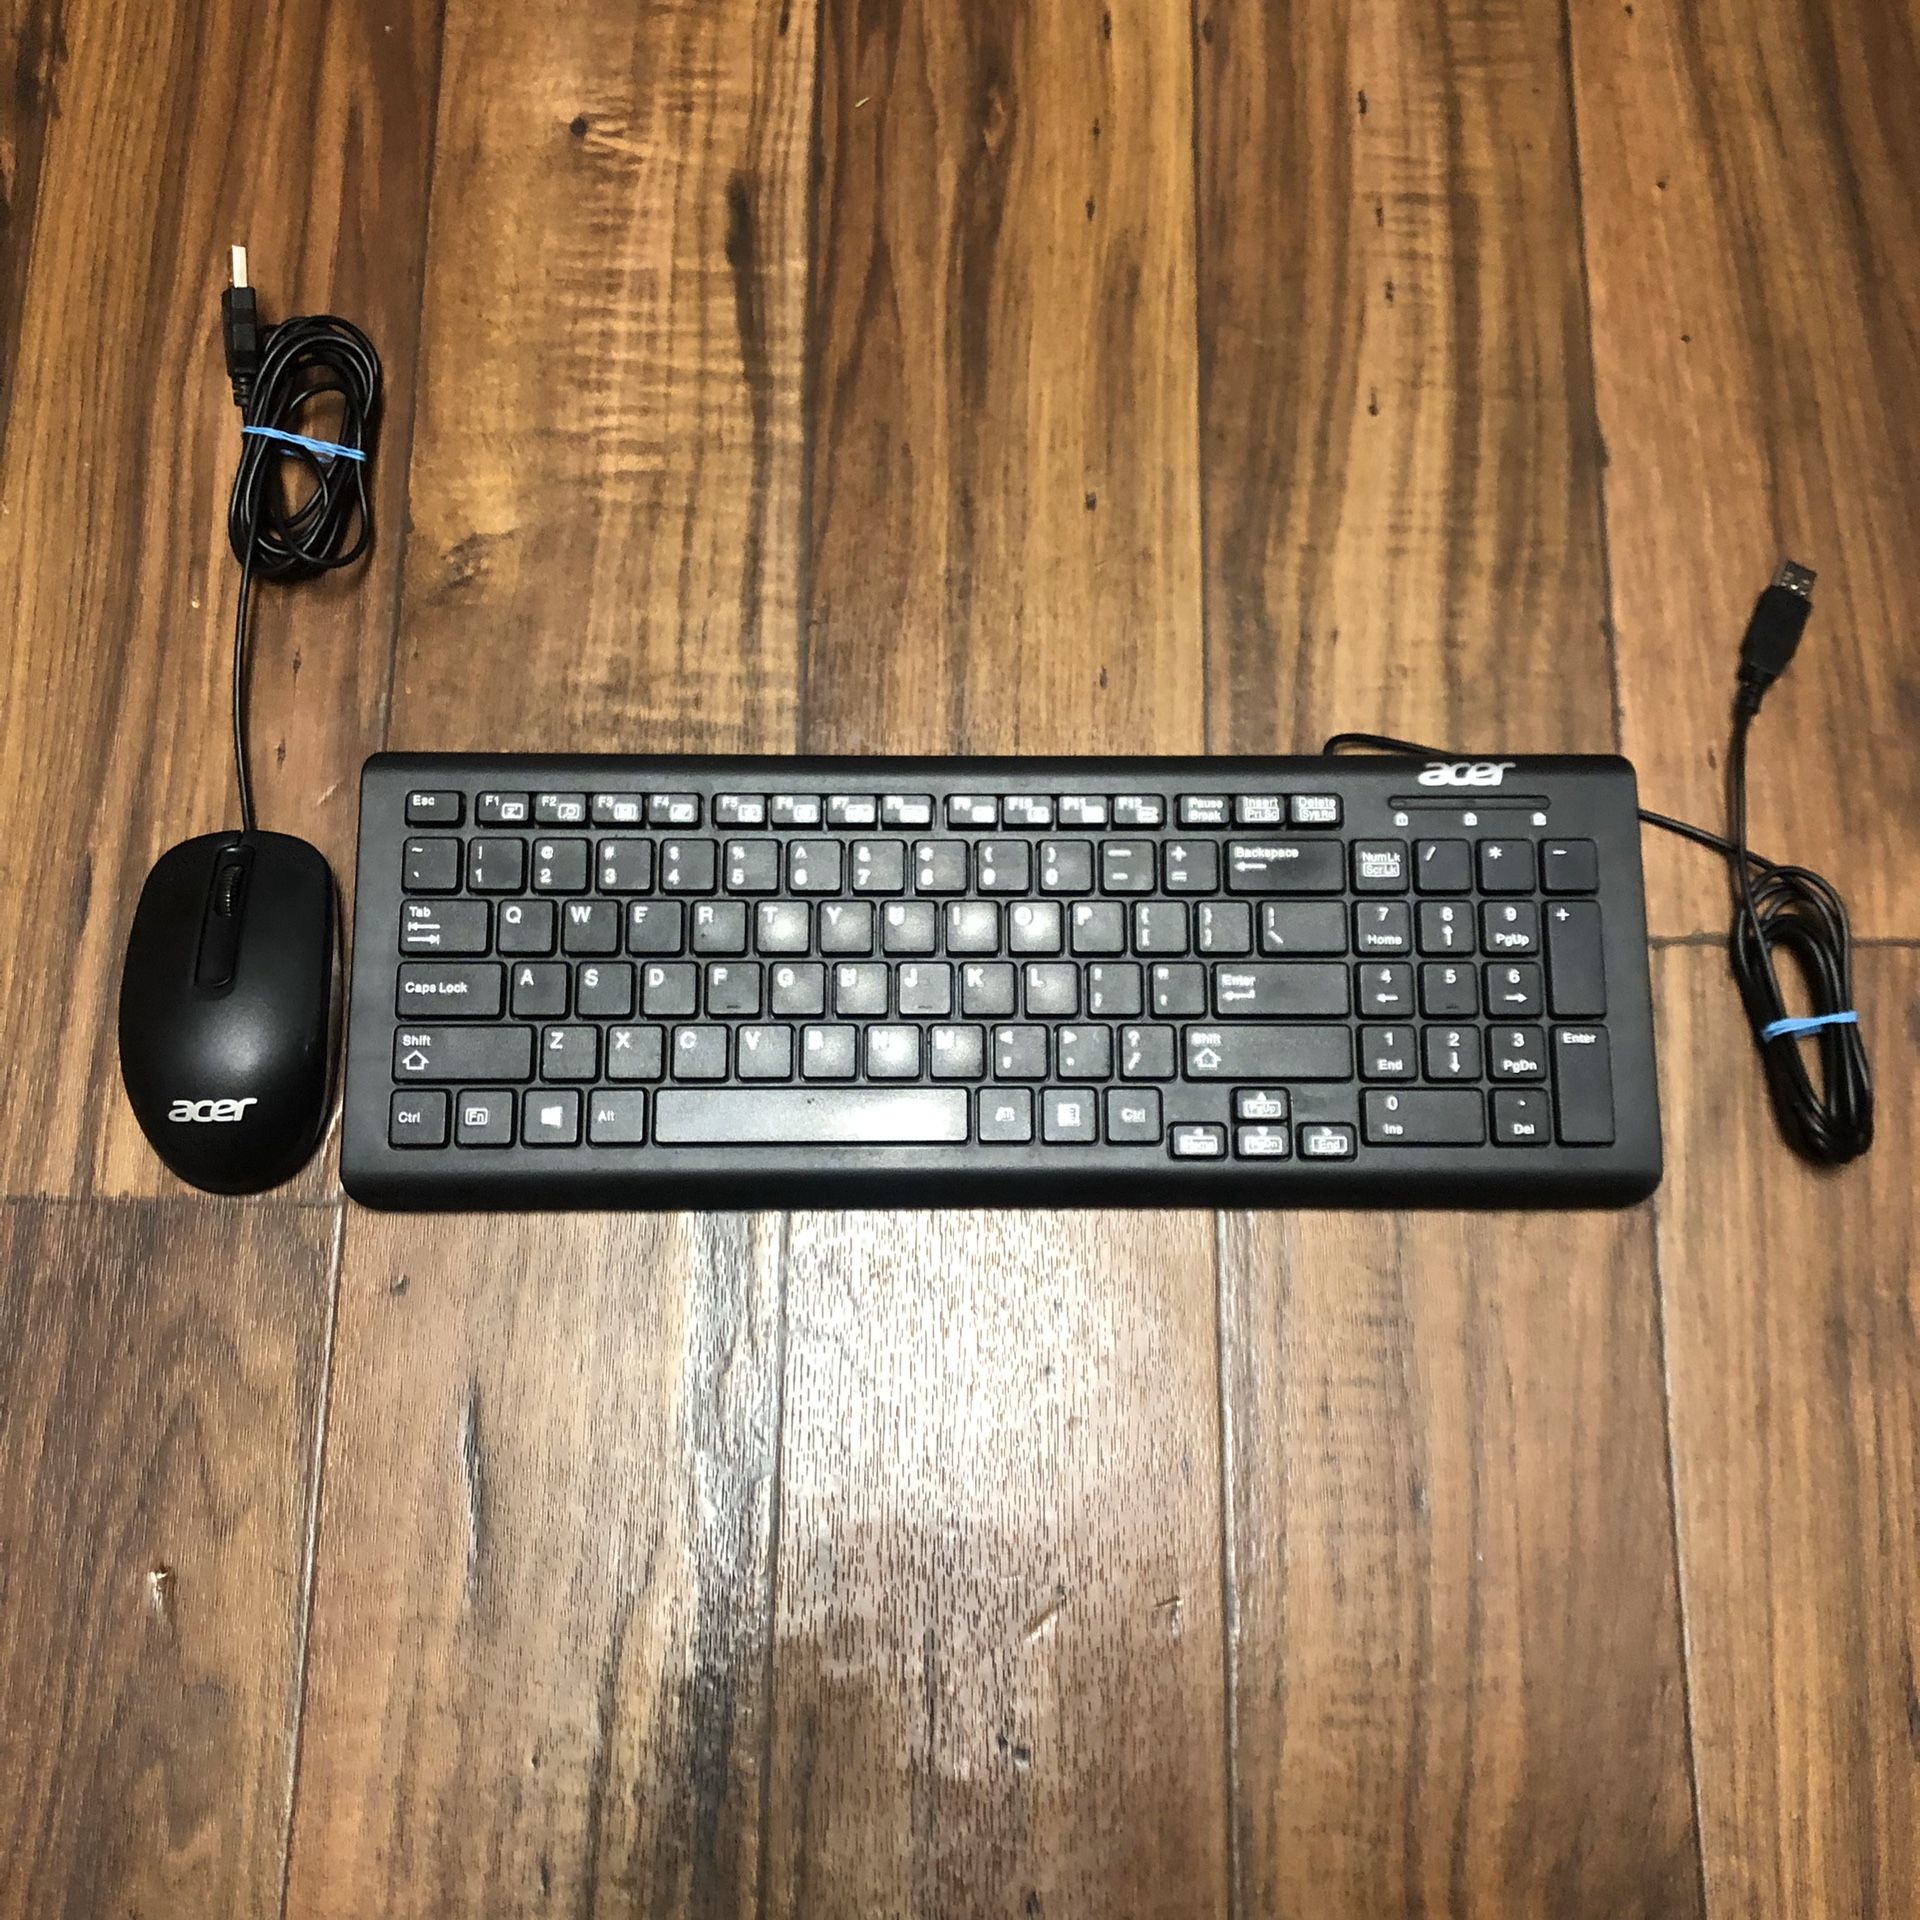 Acer Computer mouse and keyboard